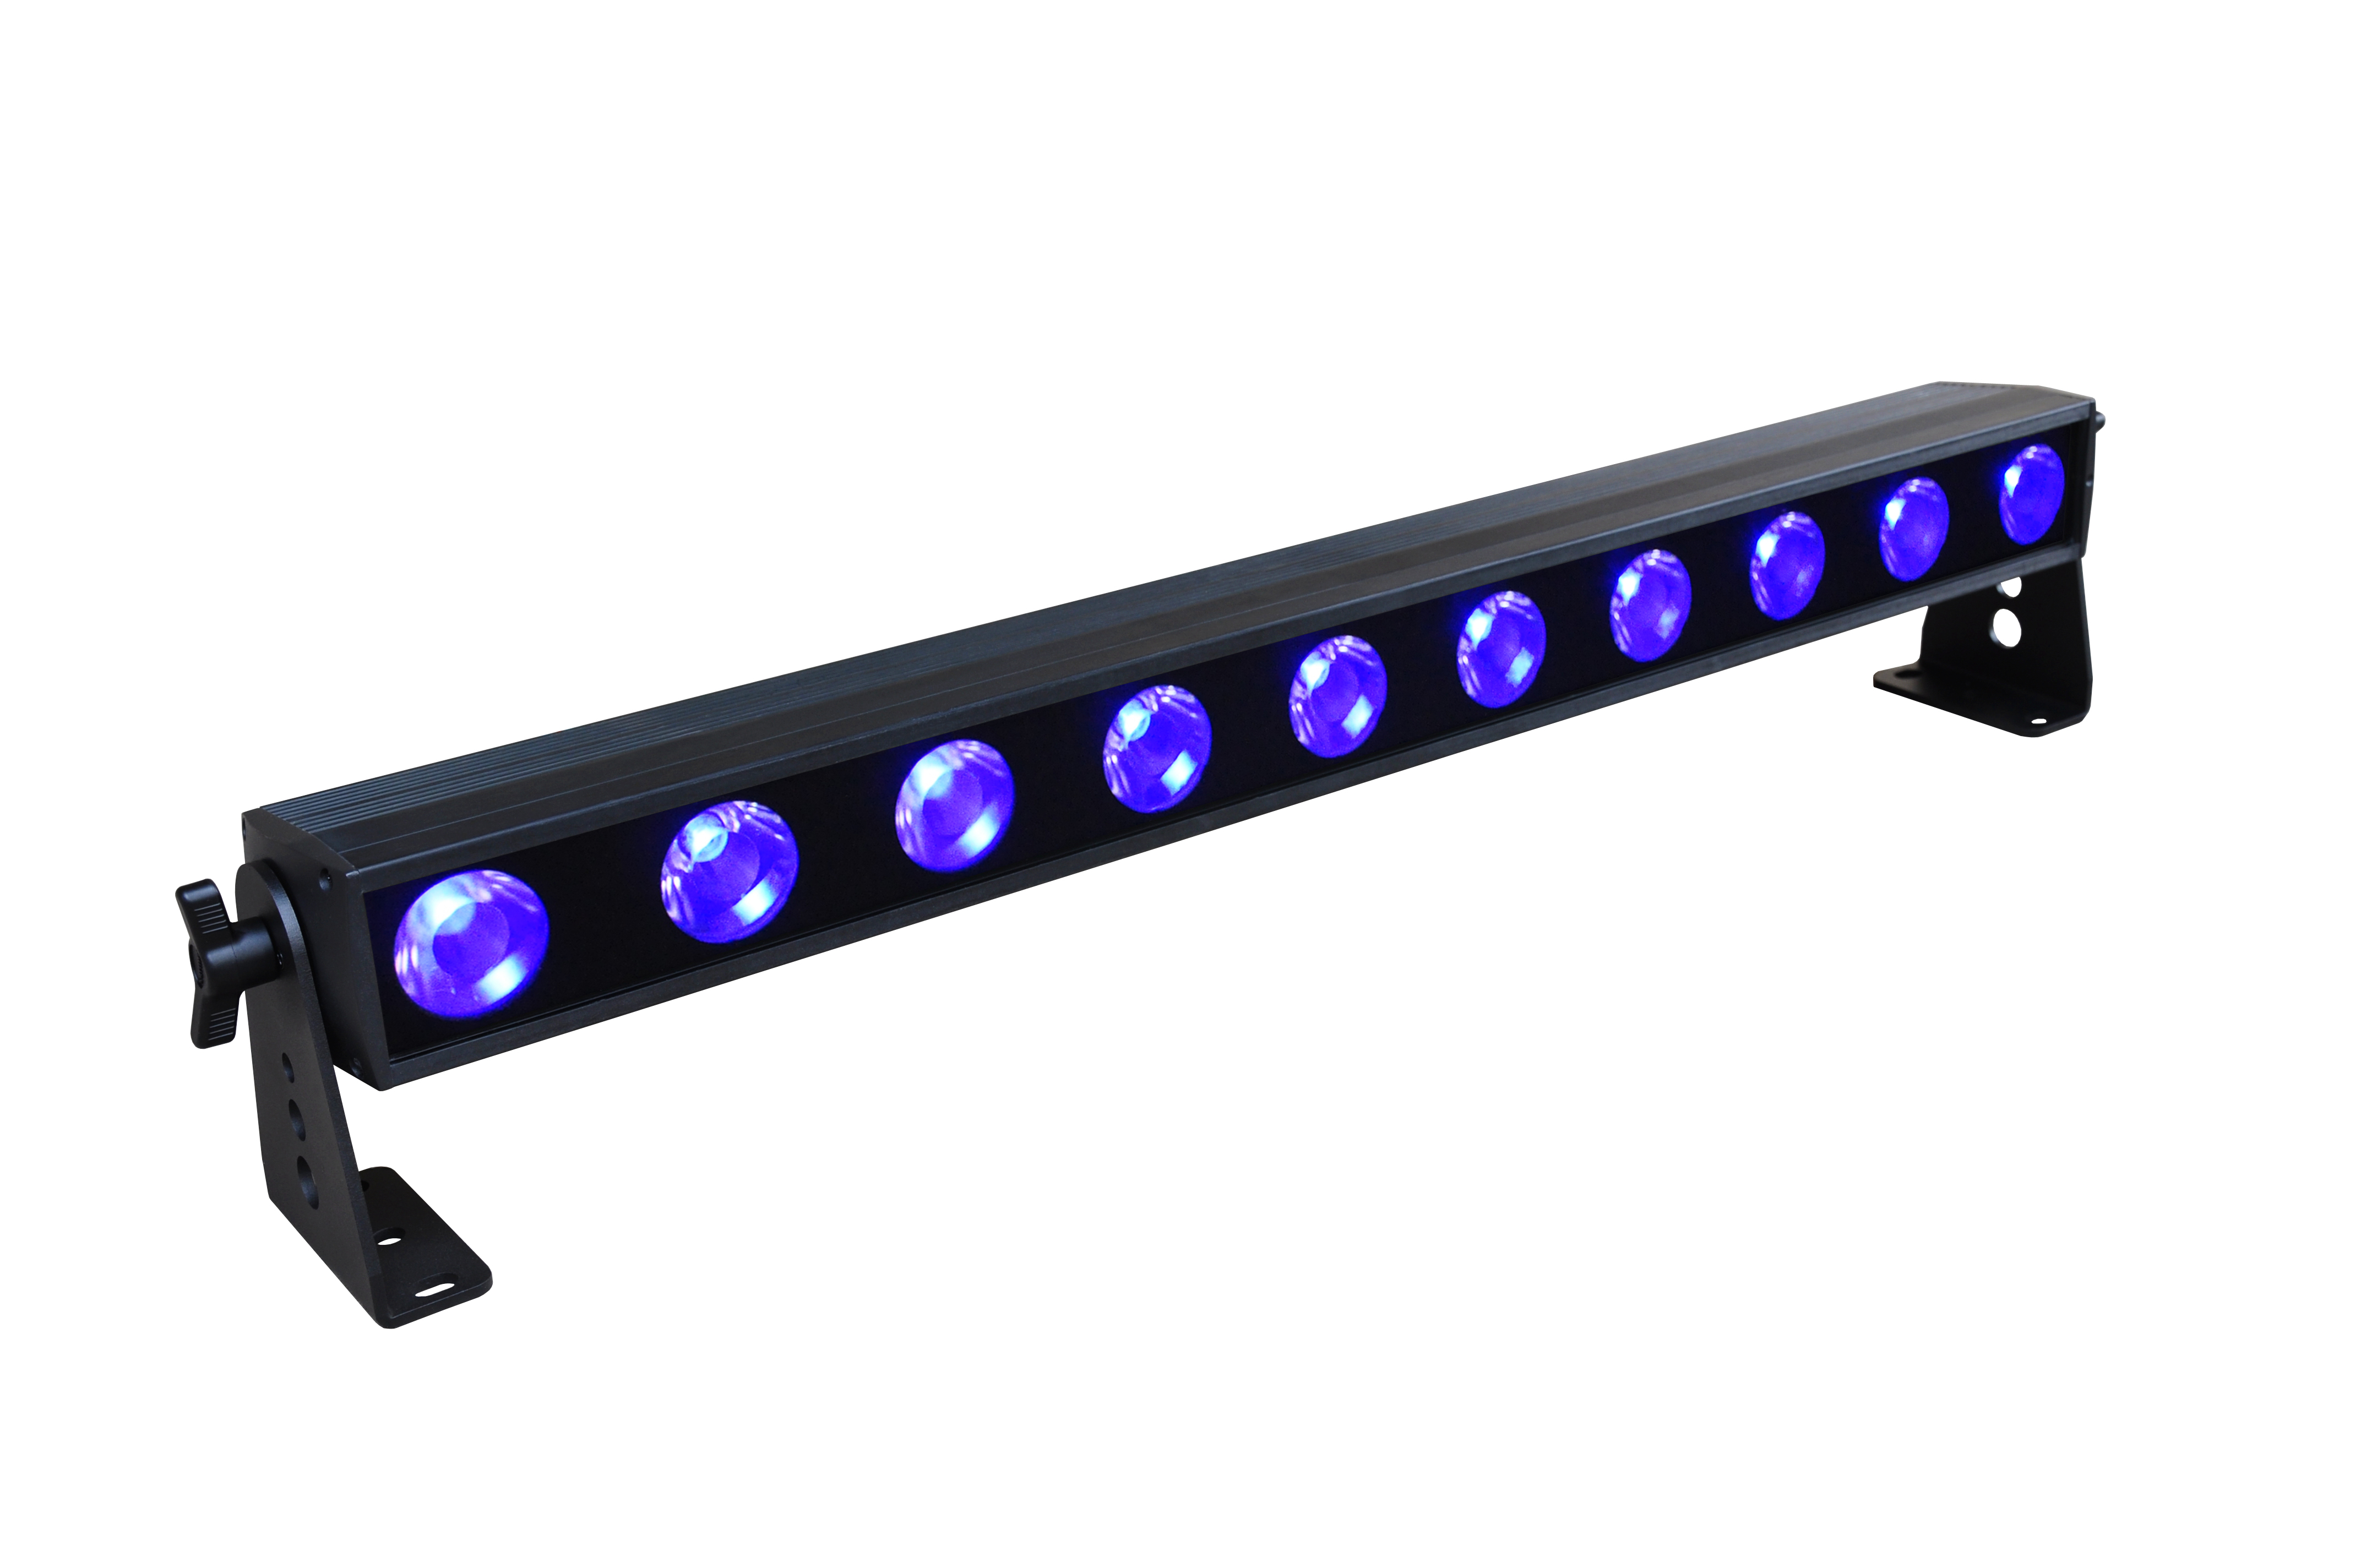 Here's a great LED Batten to hire - the Philips Showline eStrip 10 LED Batten - On Event Production Co.